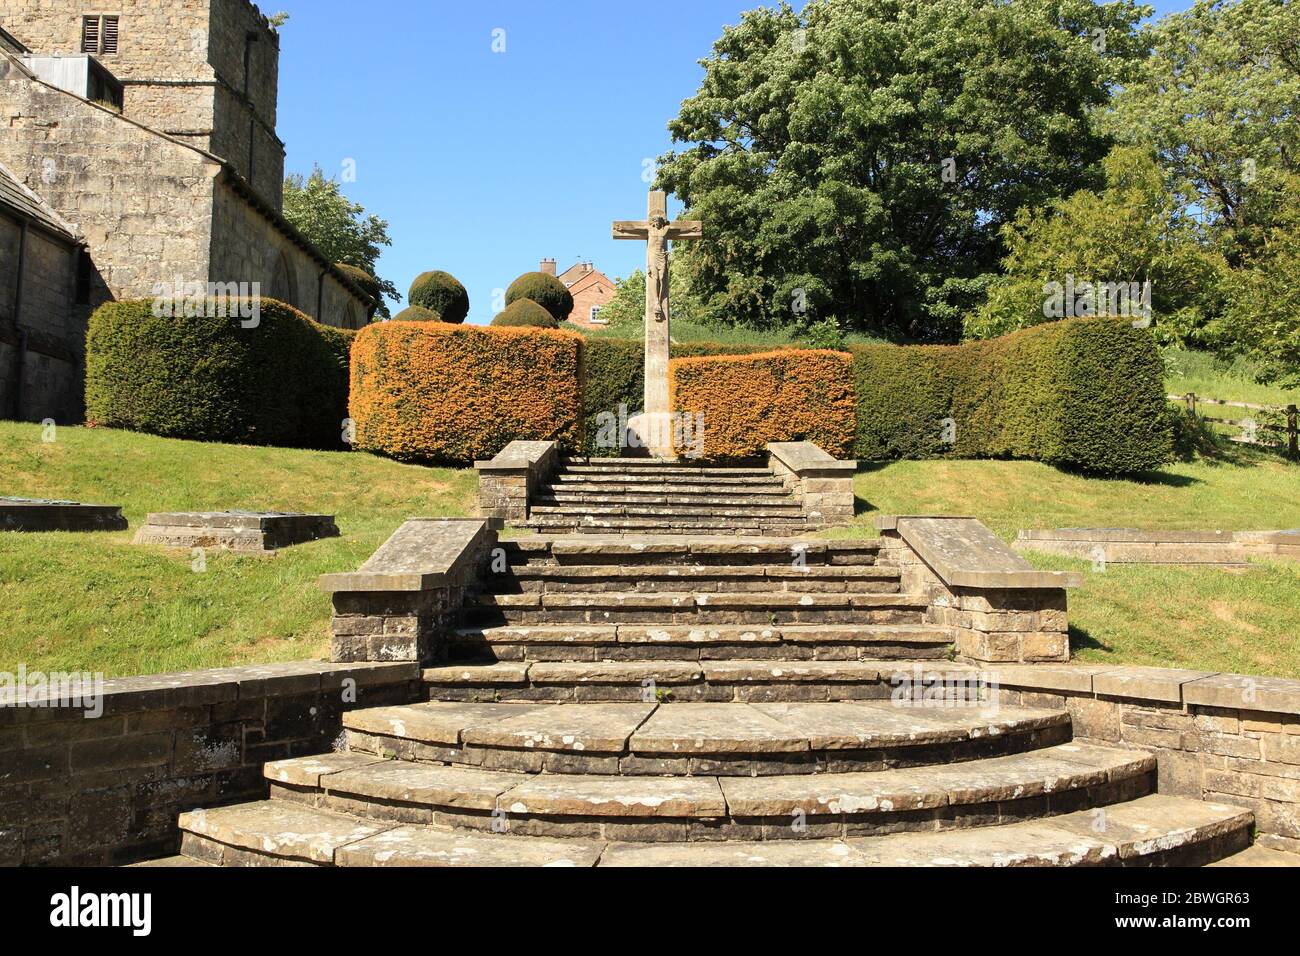 The churchyard of Kirby Underdale church in the Yorkshire wolds in summertime with steps leading to the statue of Christ on the cross Stock Photo